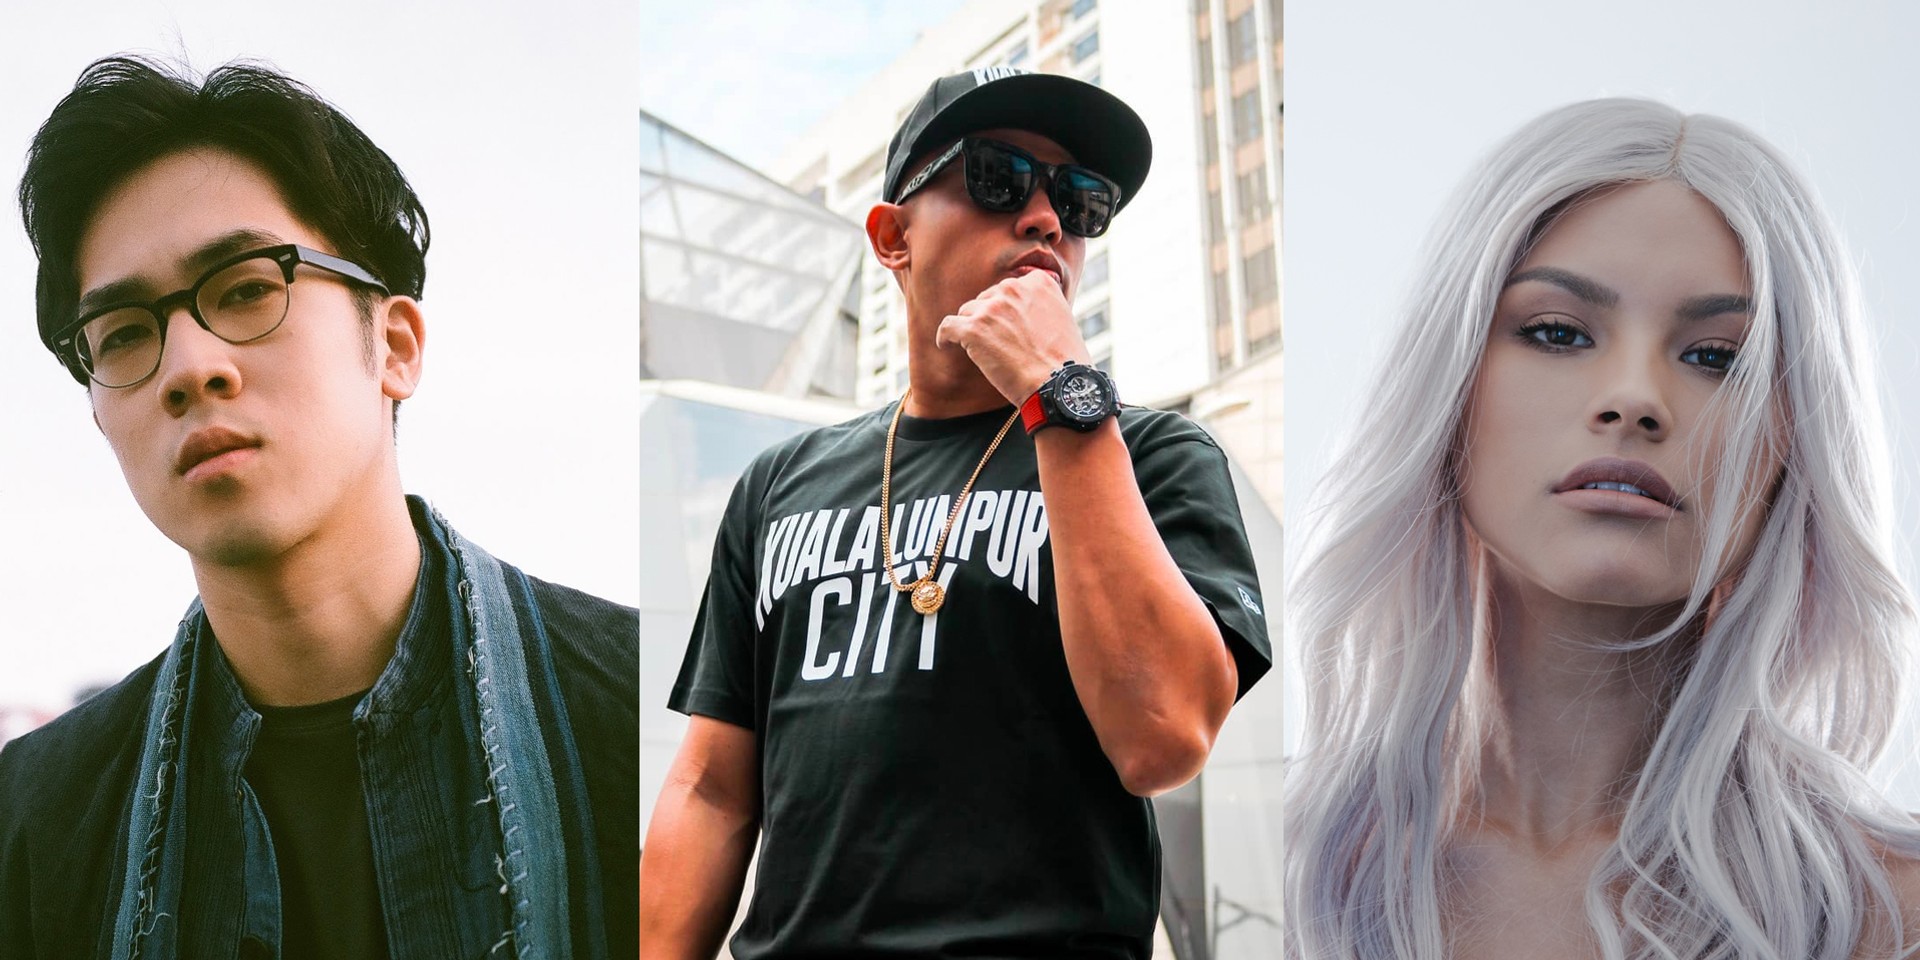 More than 30 artists, including Joe Flizzow, Charlie Lim, Tabitha Nauser to perform at SHINE Festival this weekend